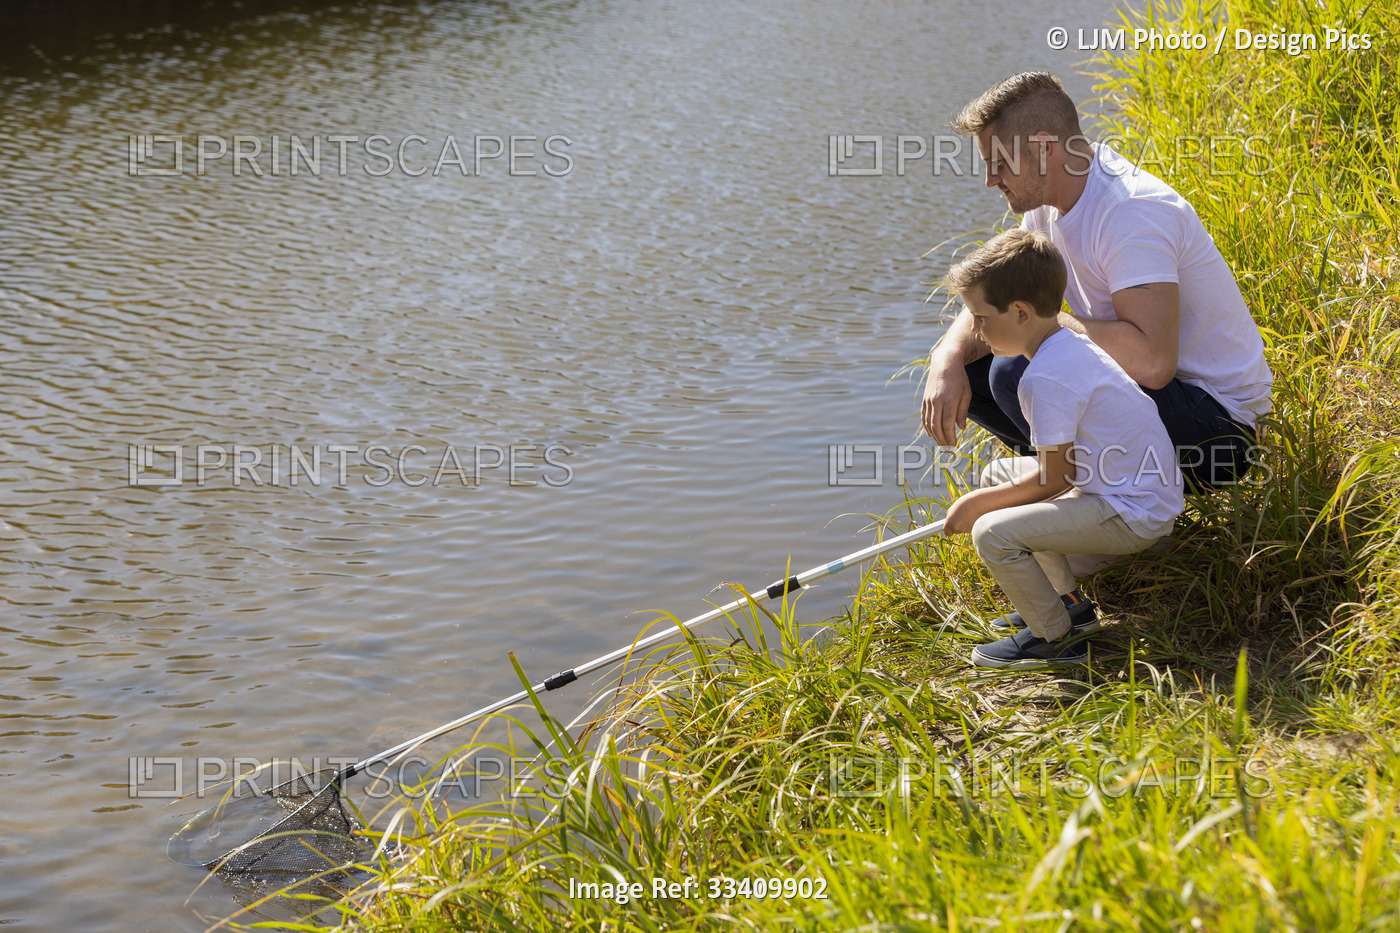 A father and son catching bugs in a stream in a city park during the fall ...